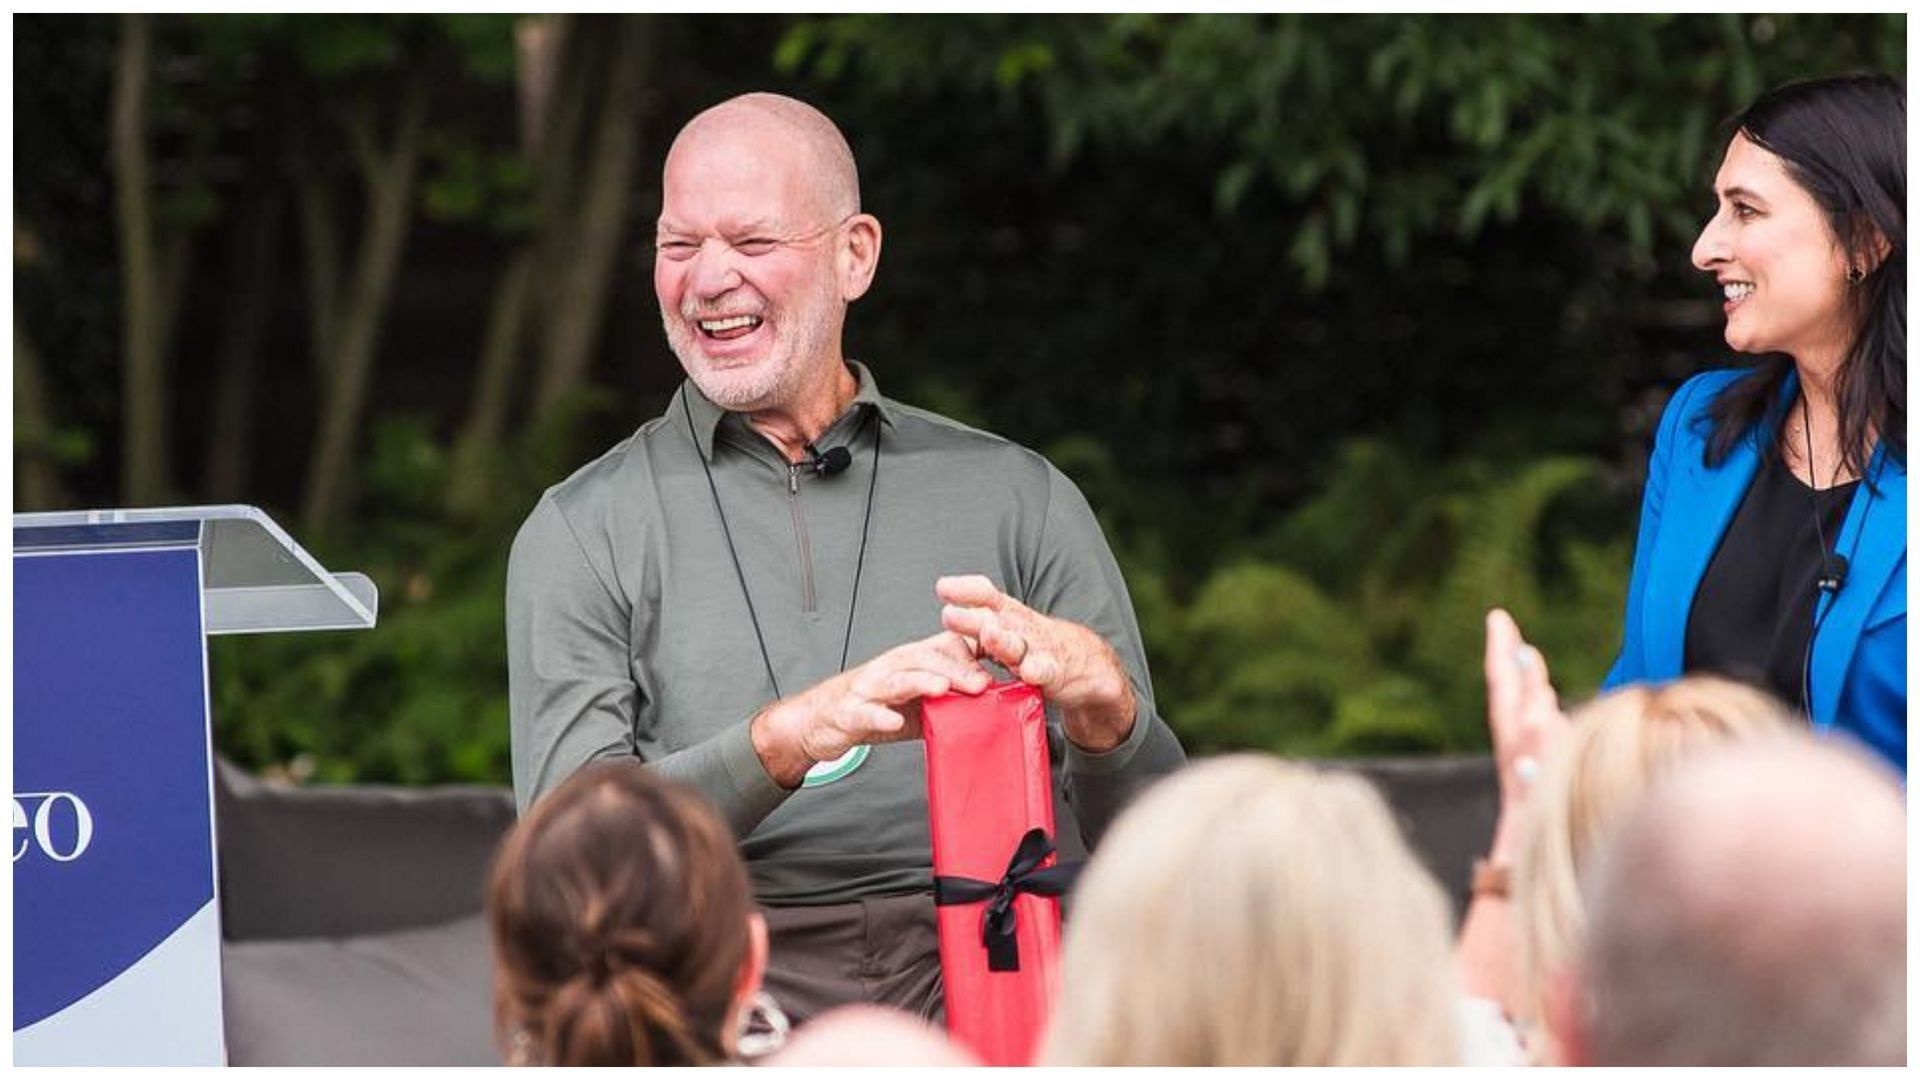 Chip Wilson took aim at his former company in a Forbes interview (Image via Instagram/@chipwilsonofficial)